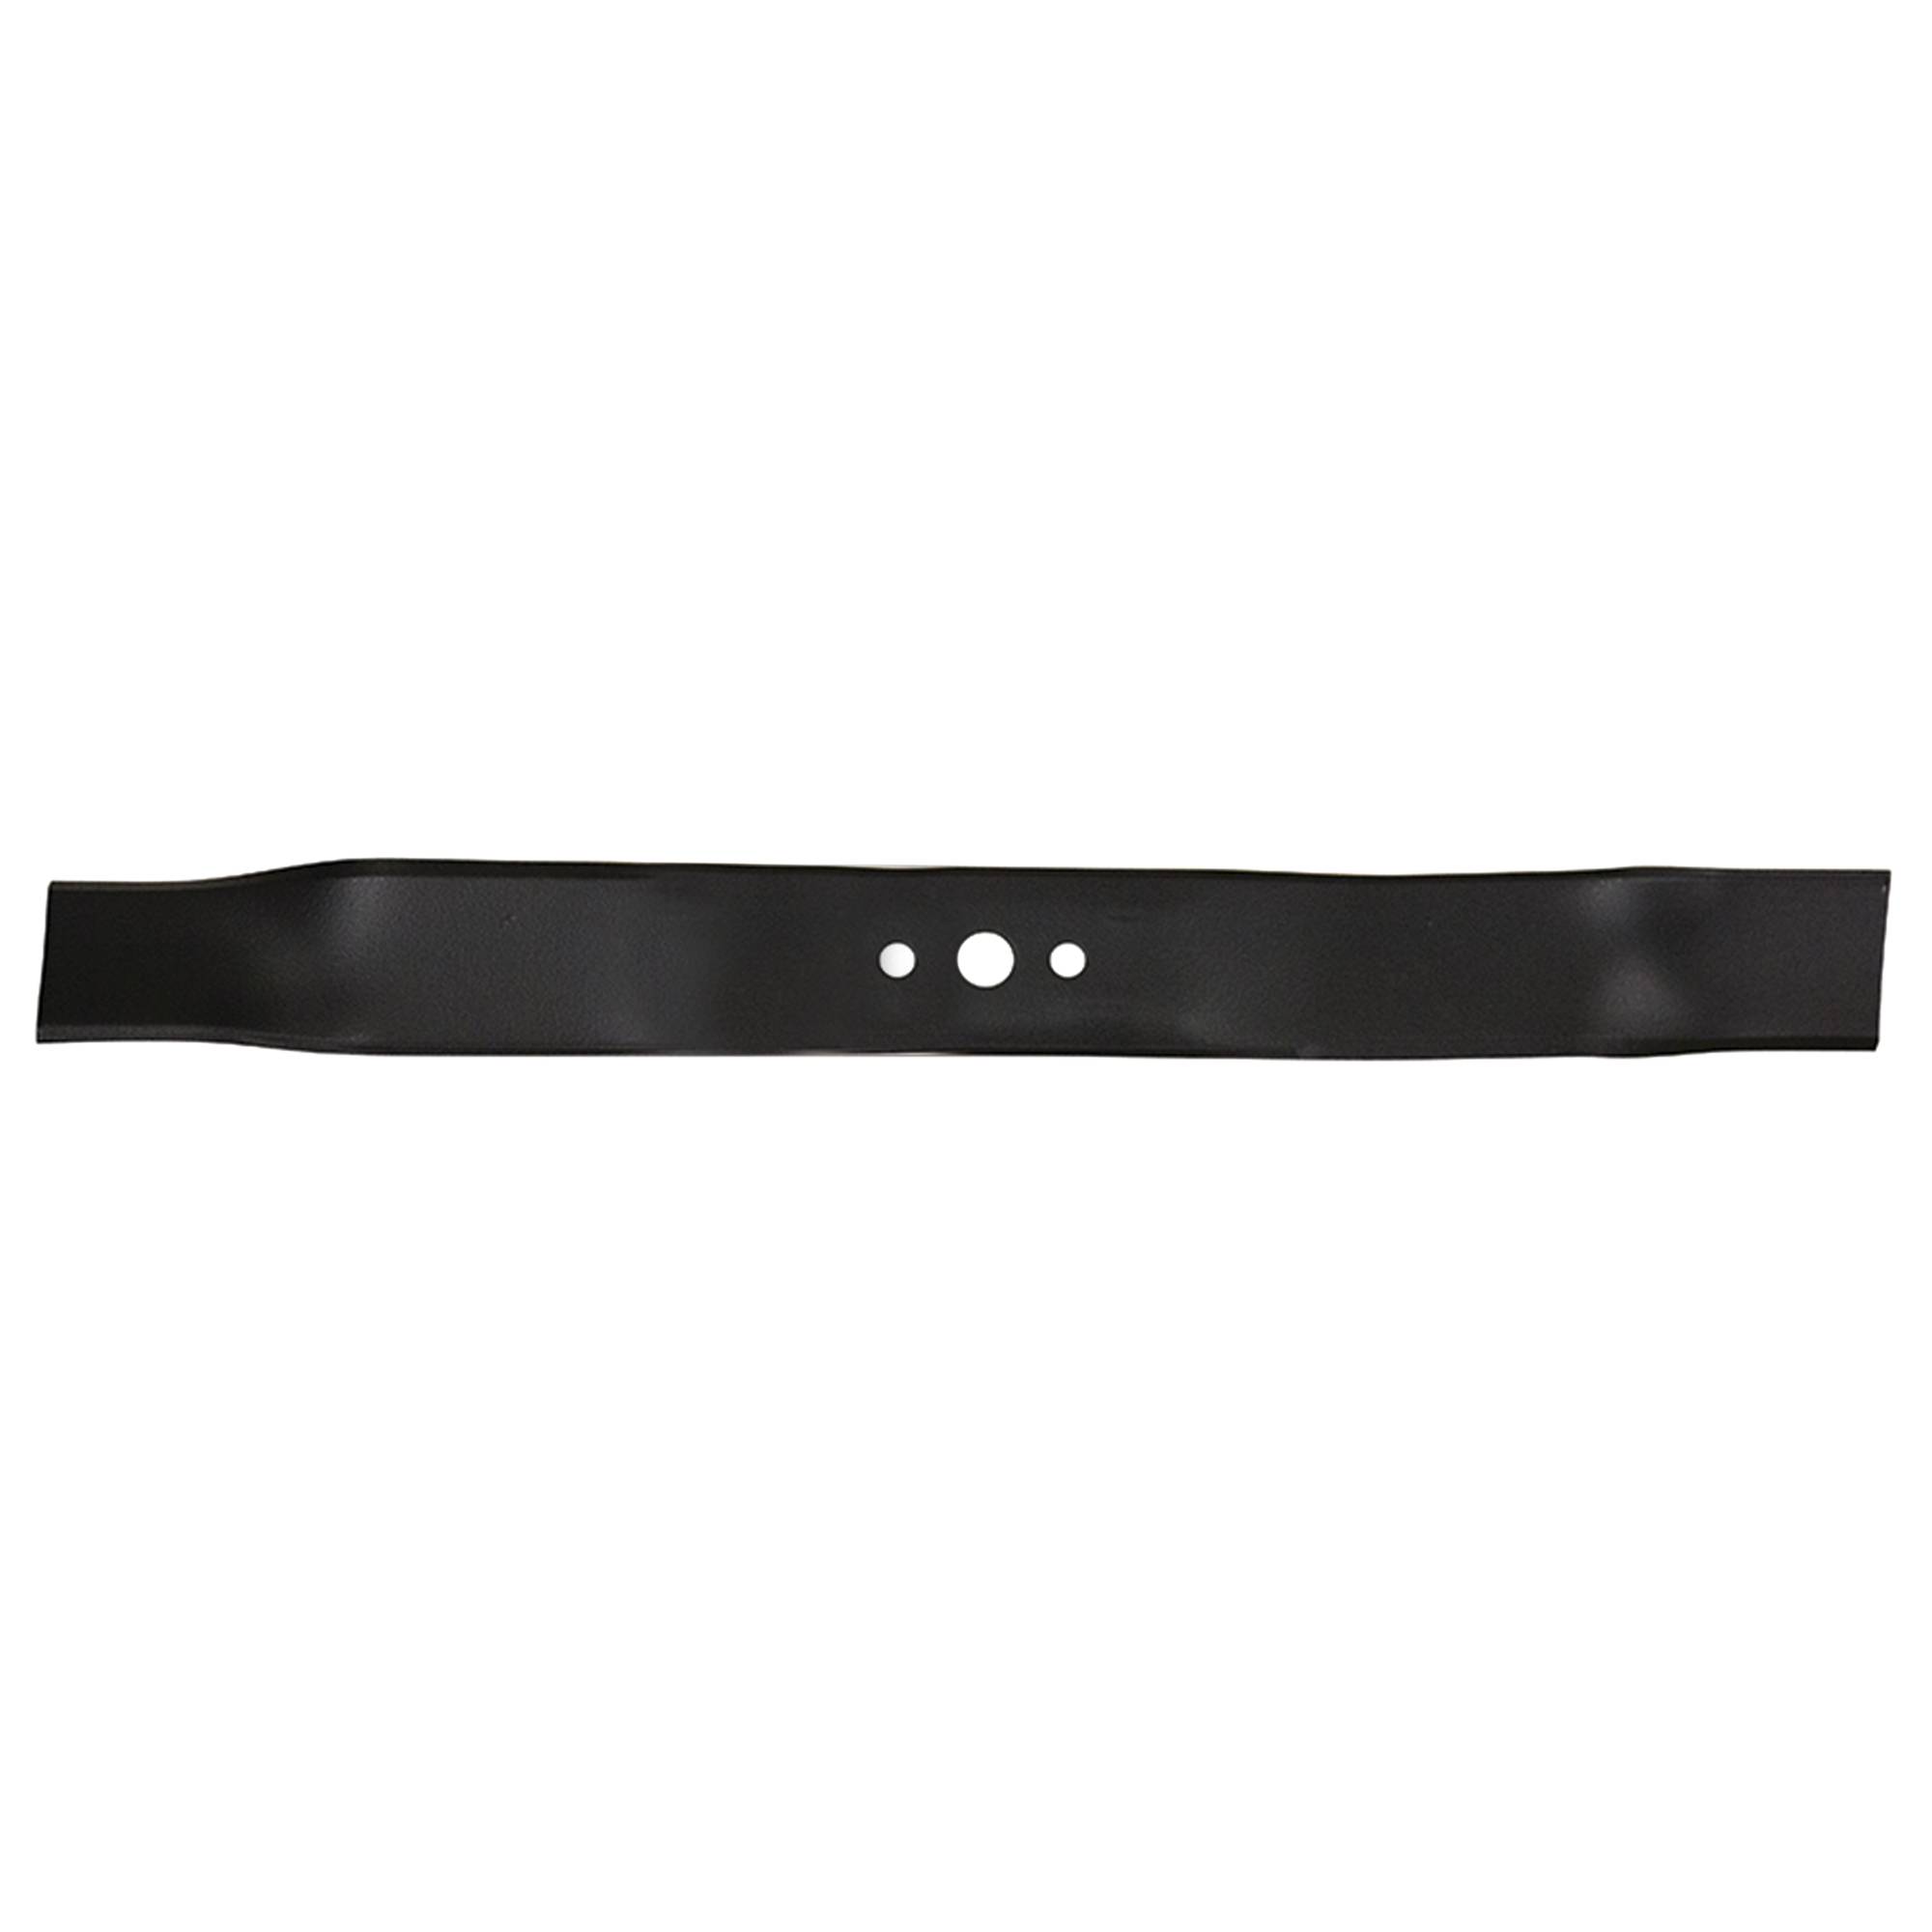 New Stens Mulching Blade Replaces, AYP 532406712 , 340-248 - image 2 of 4